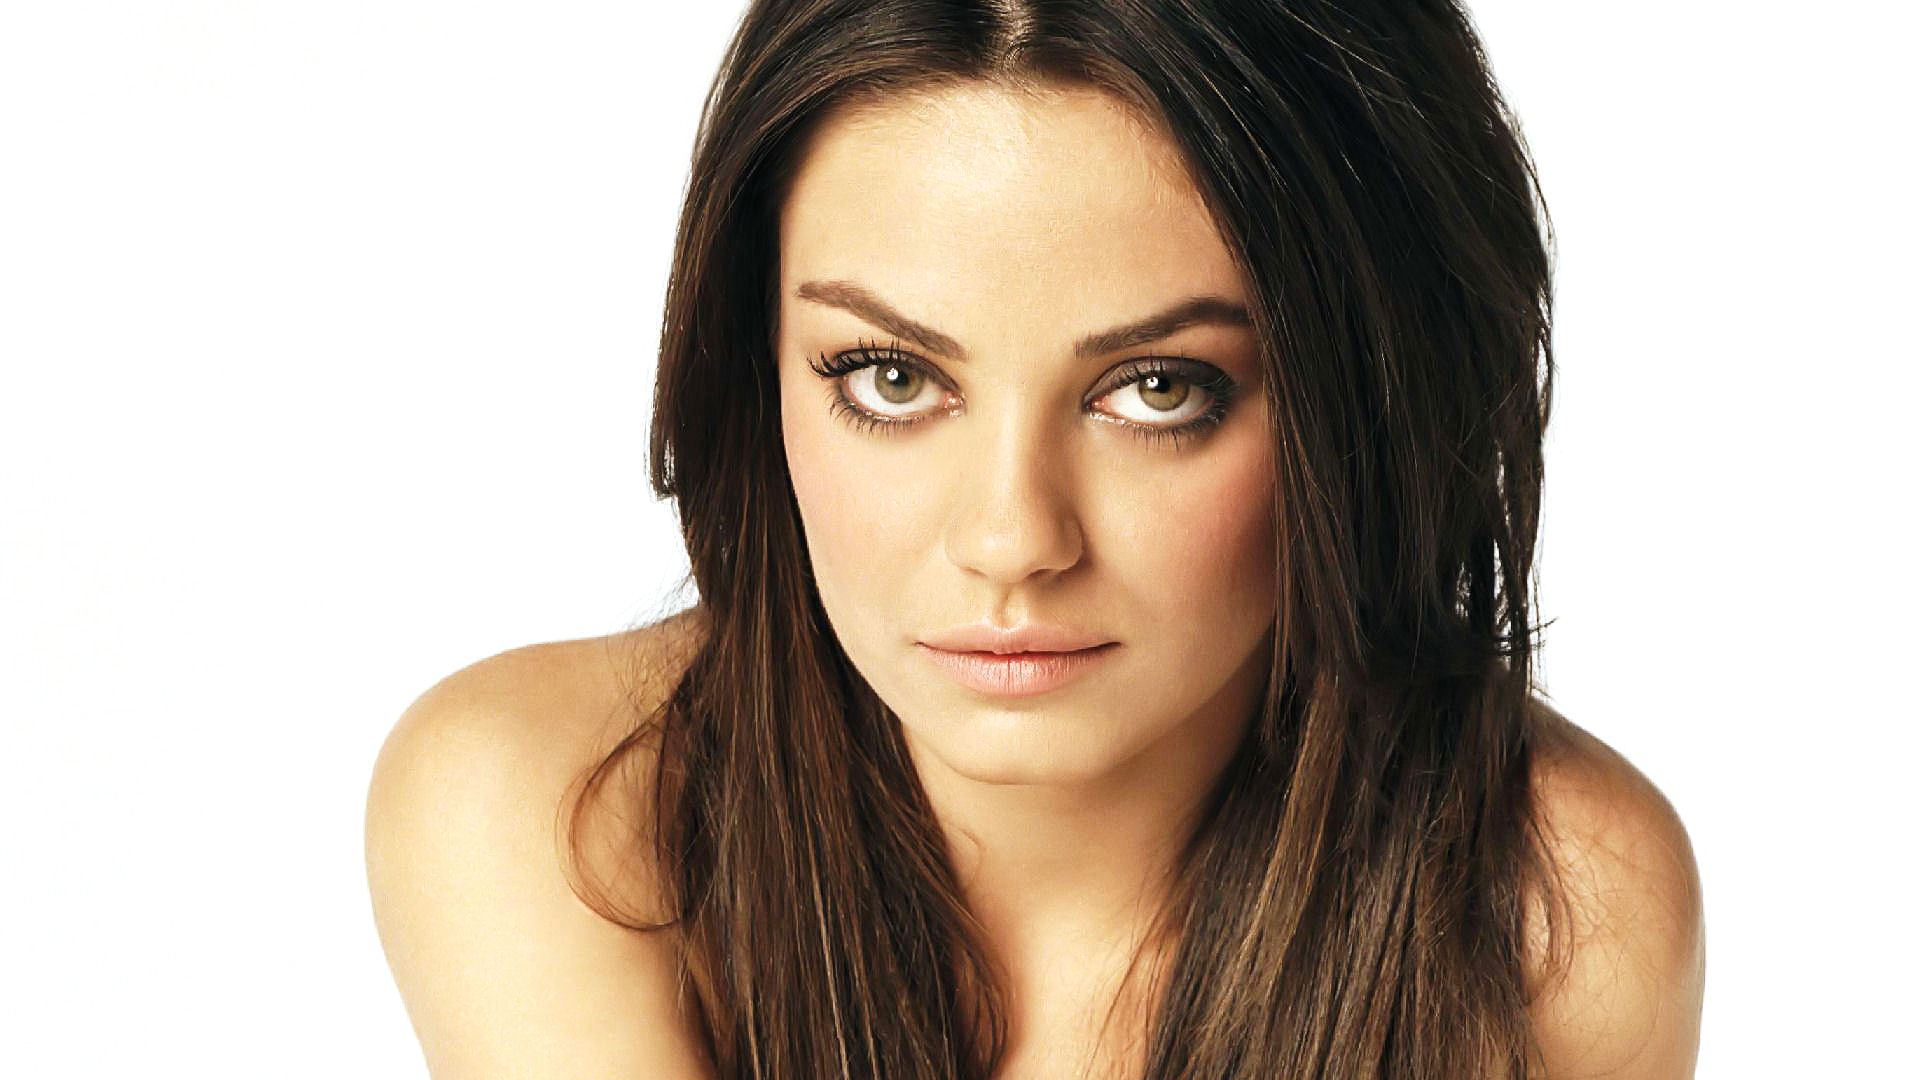 Overview of the roles and movies of actress Mila Kunis